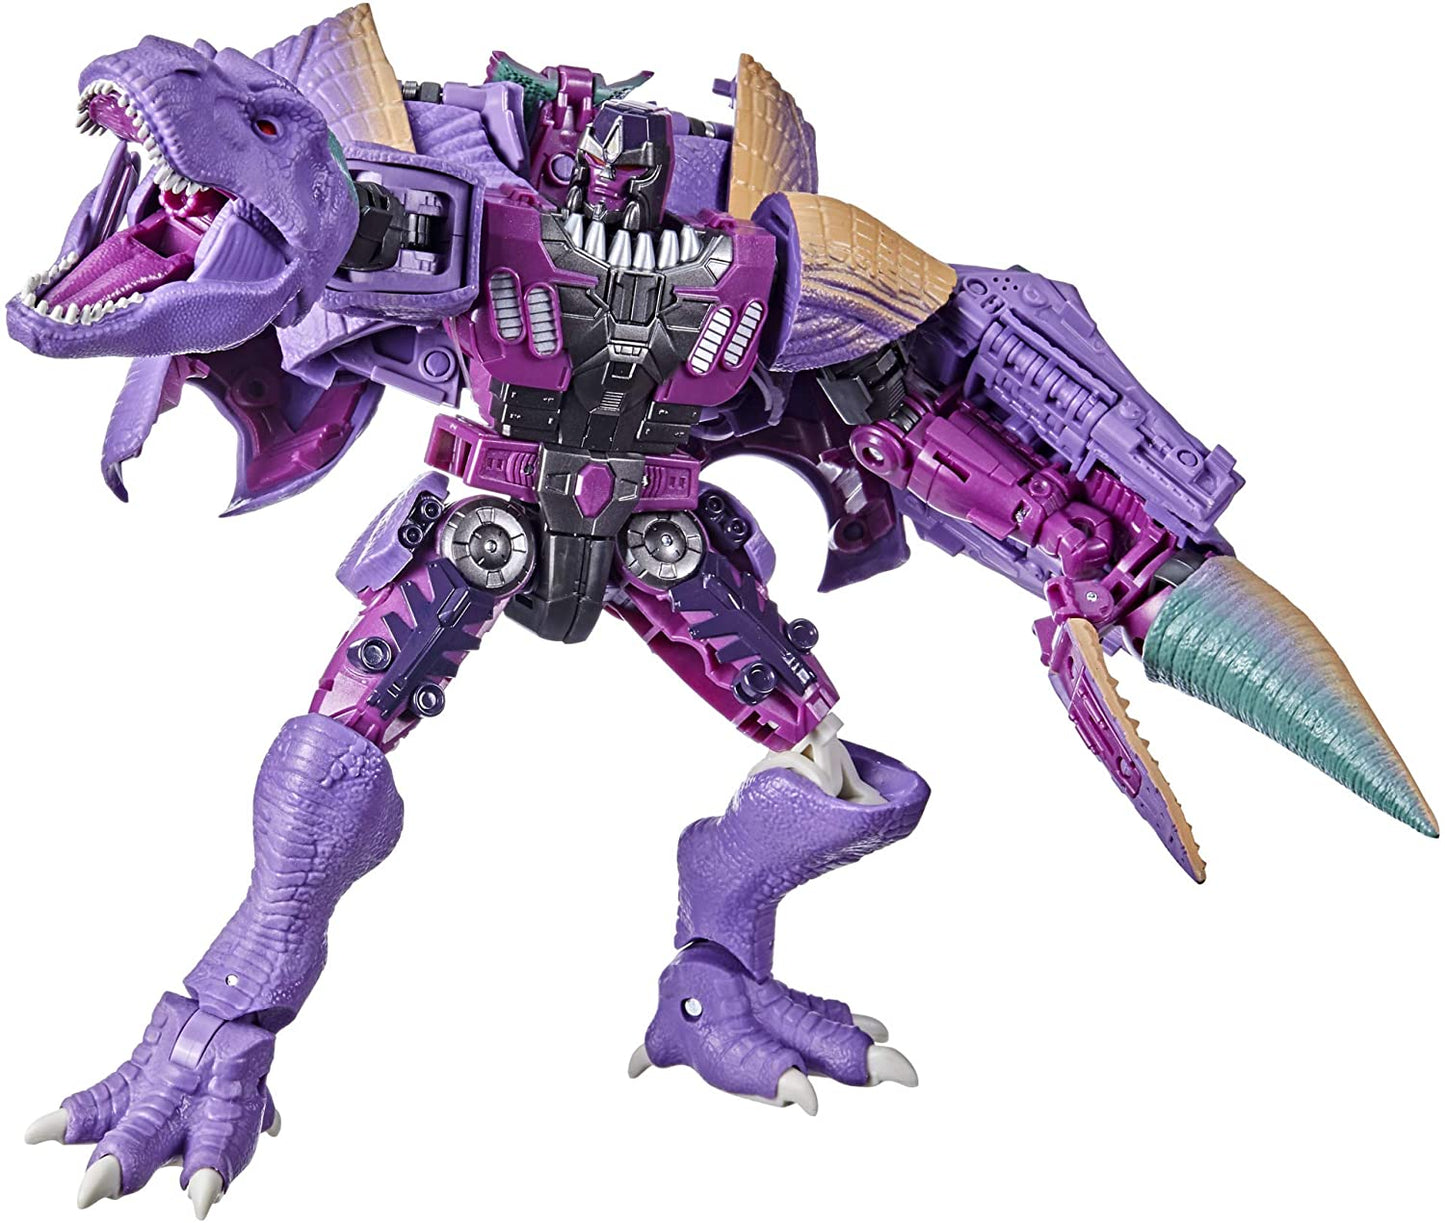 Transformers Toys Generations War for Cybertron: Kingdom Leader WFC-K10 Megatron (Beast) Action Figure - 8 and Up, 7.5-inch - Transformer action figure Heretoserveyou